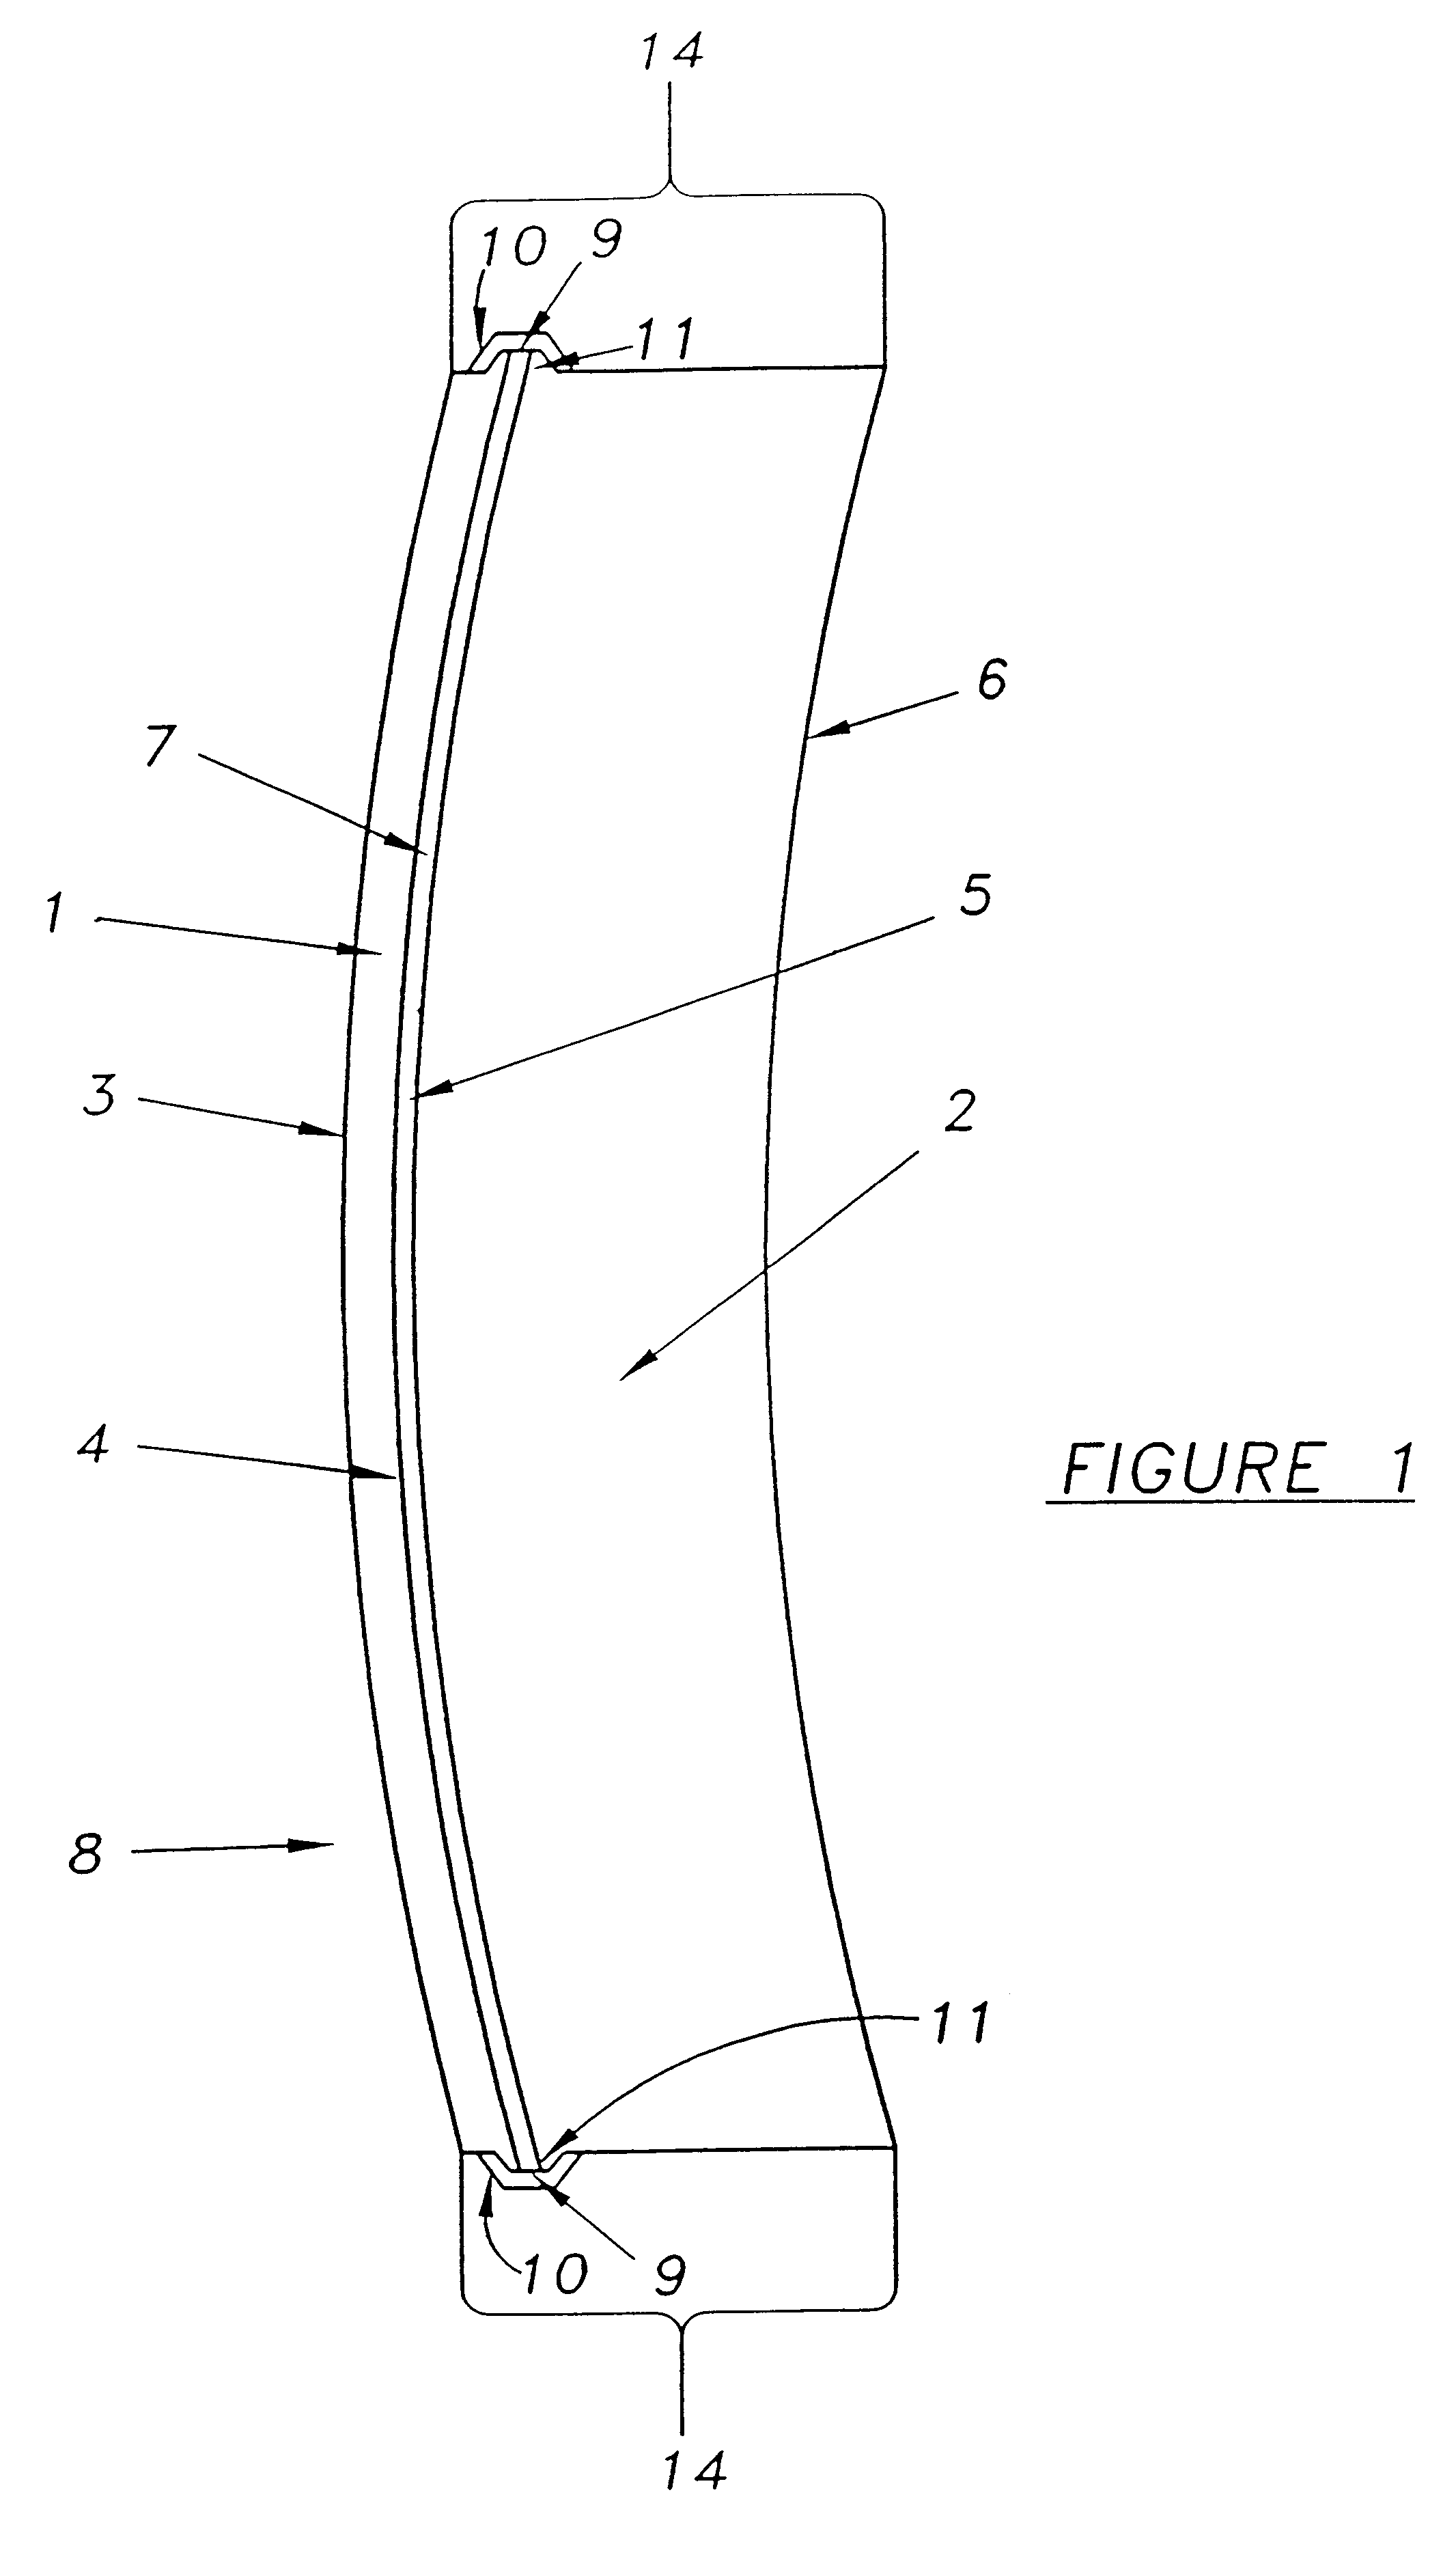 Method for forming a molded edge seal